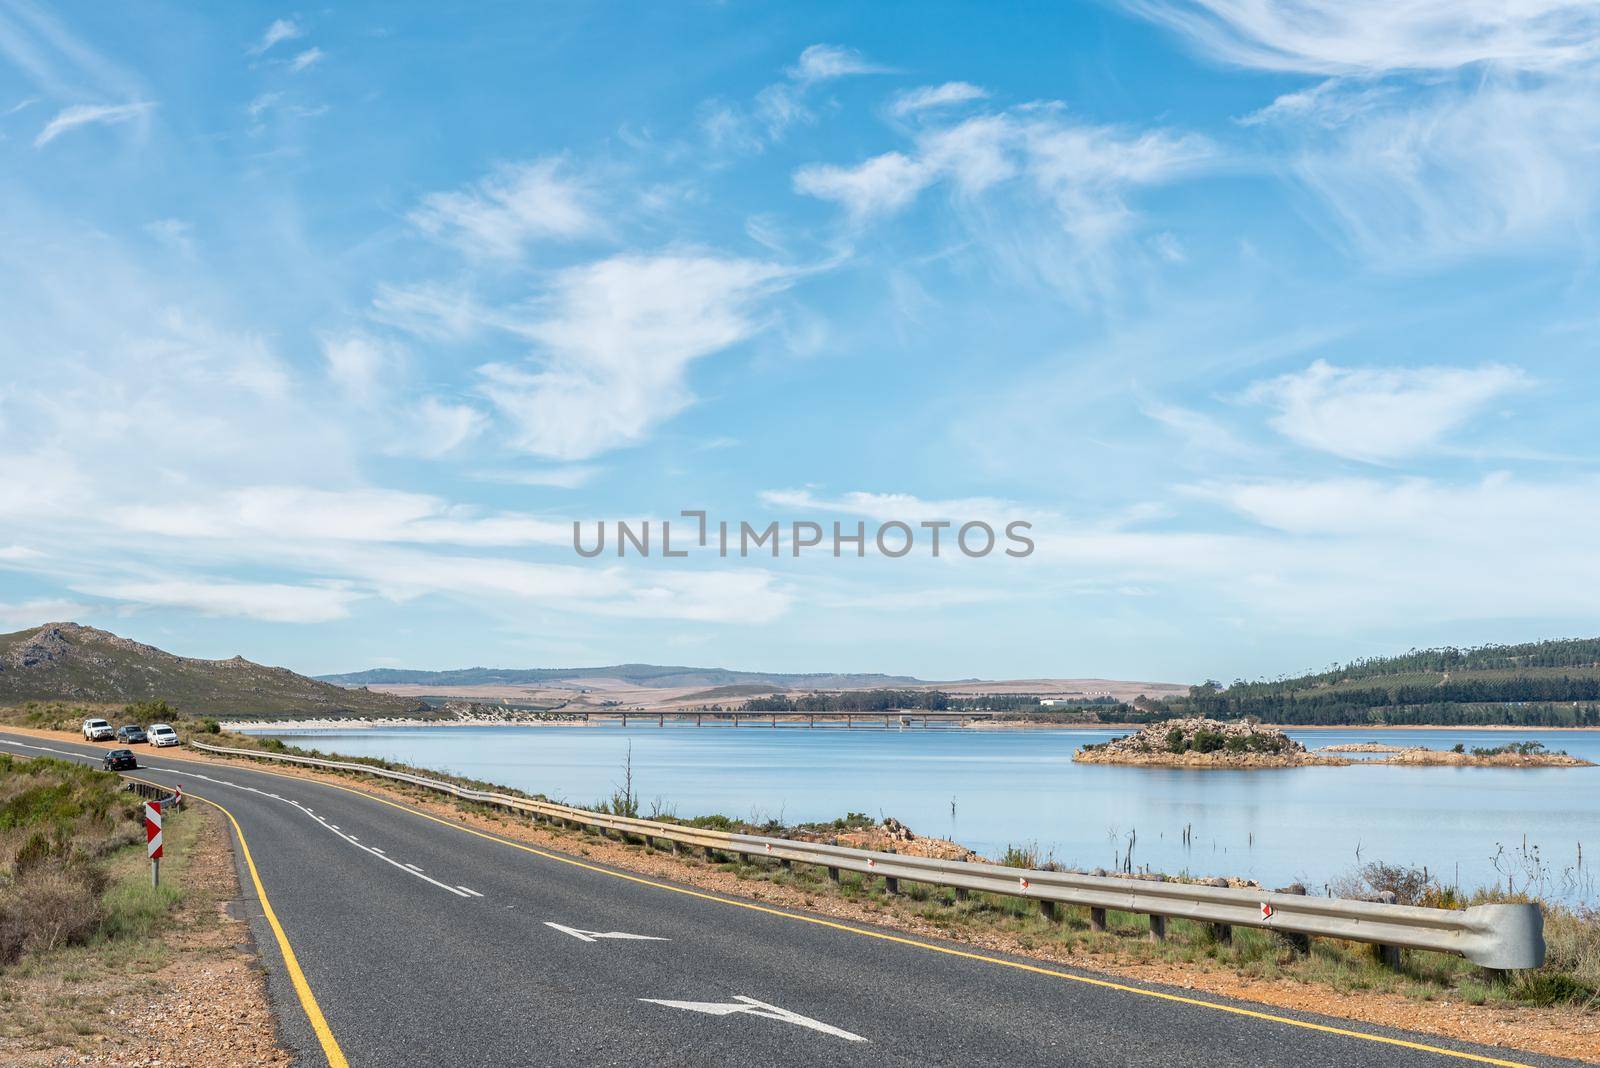 The Theewaterskloof Dam in the Western Cape Province as seen from road R45. Vehicles and a road bridge are visible